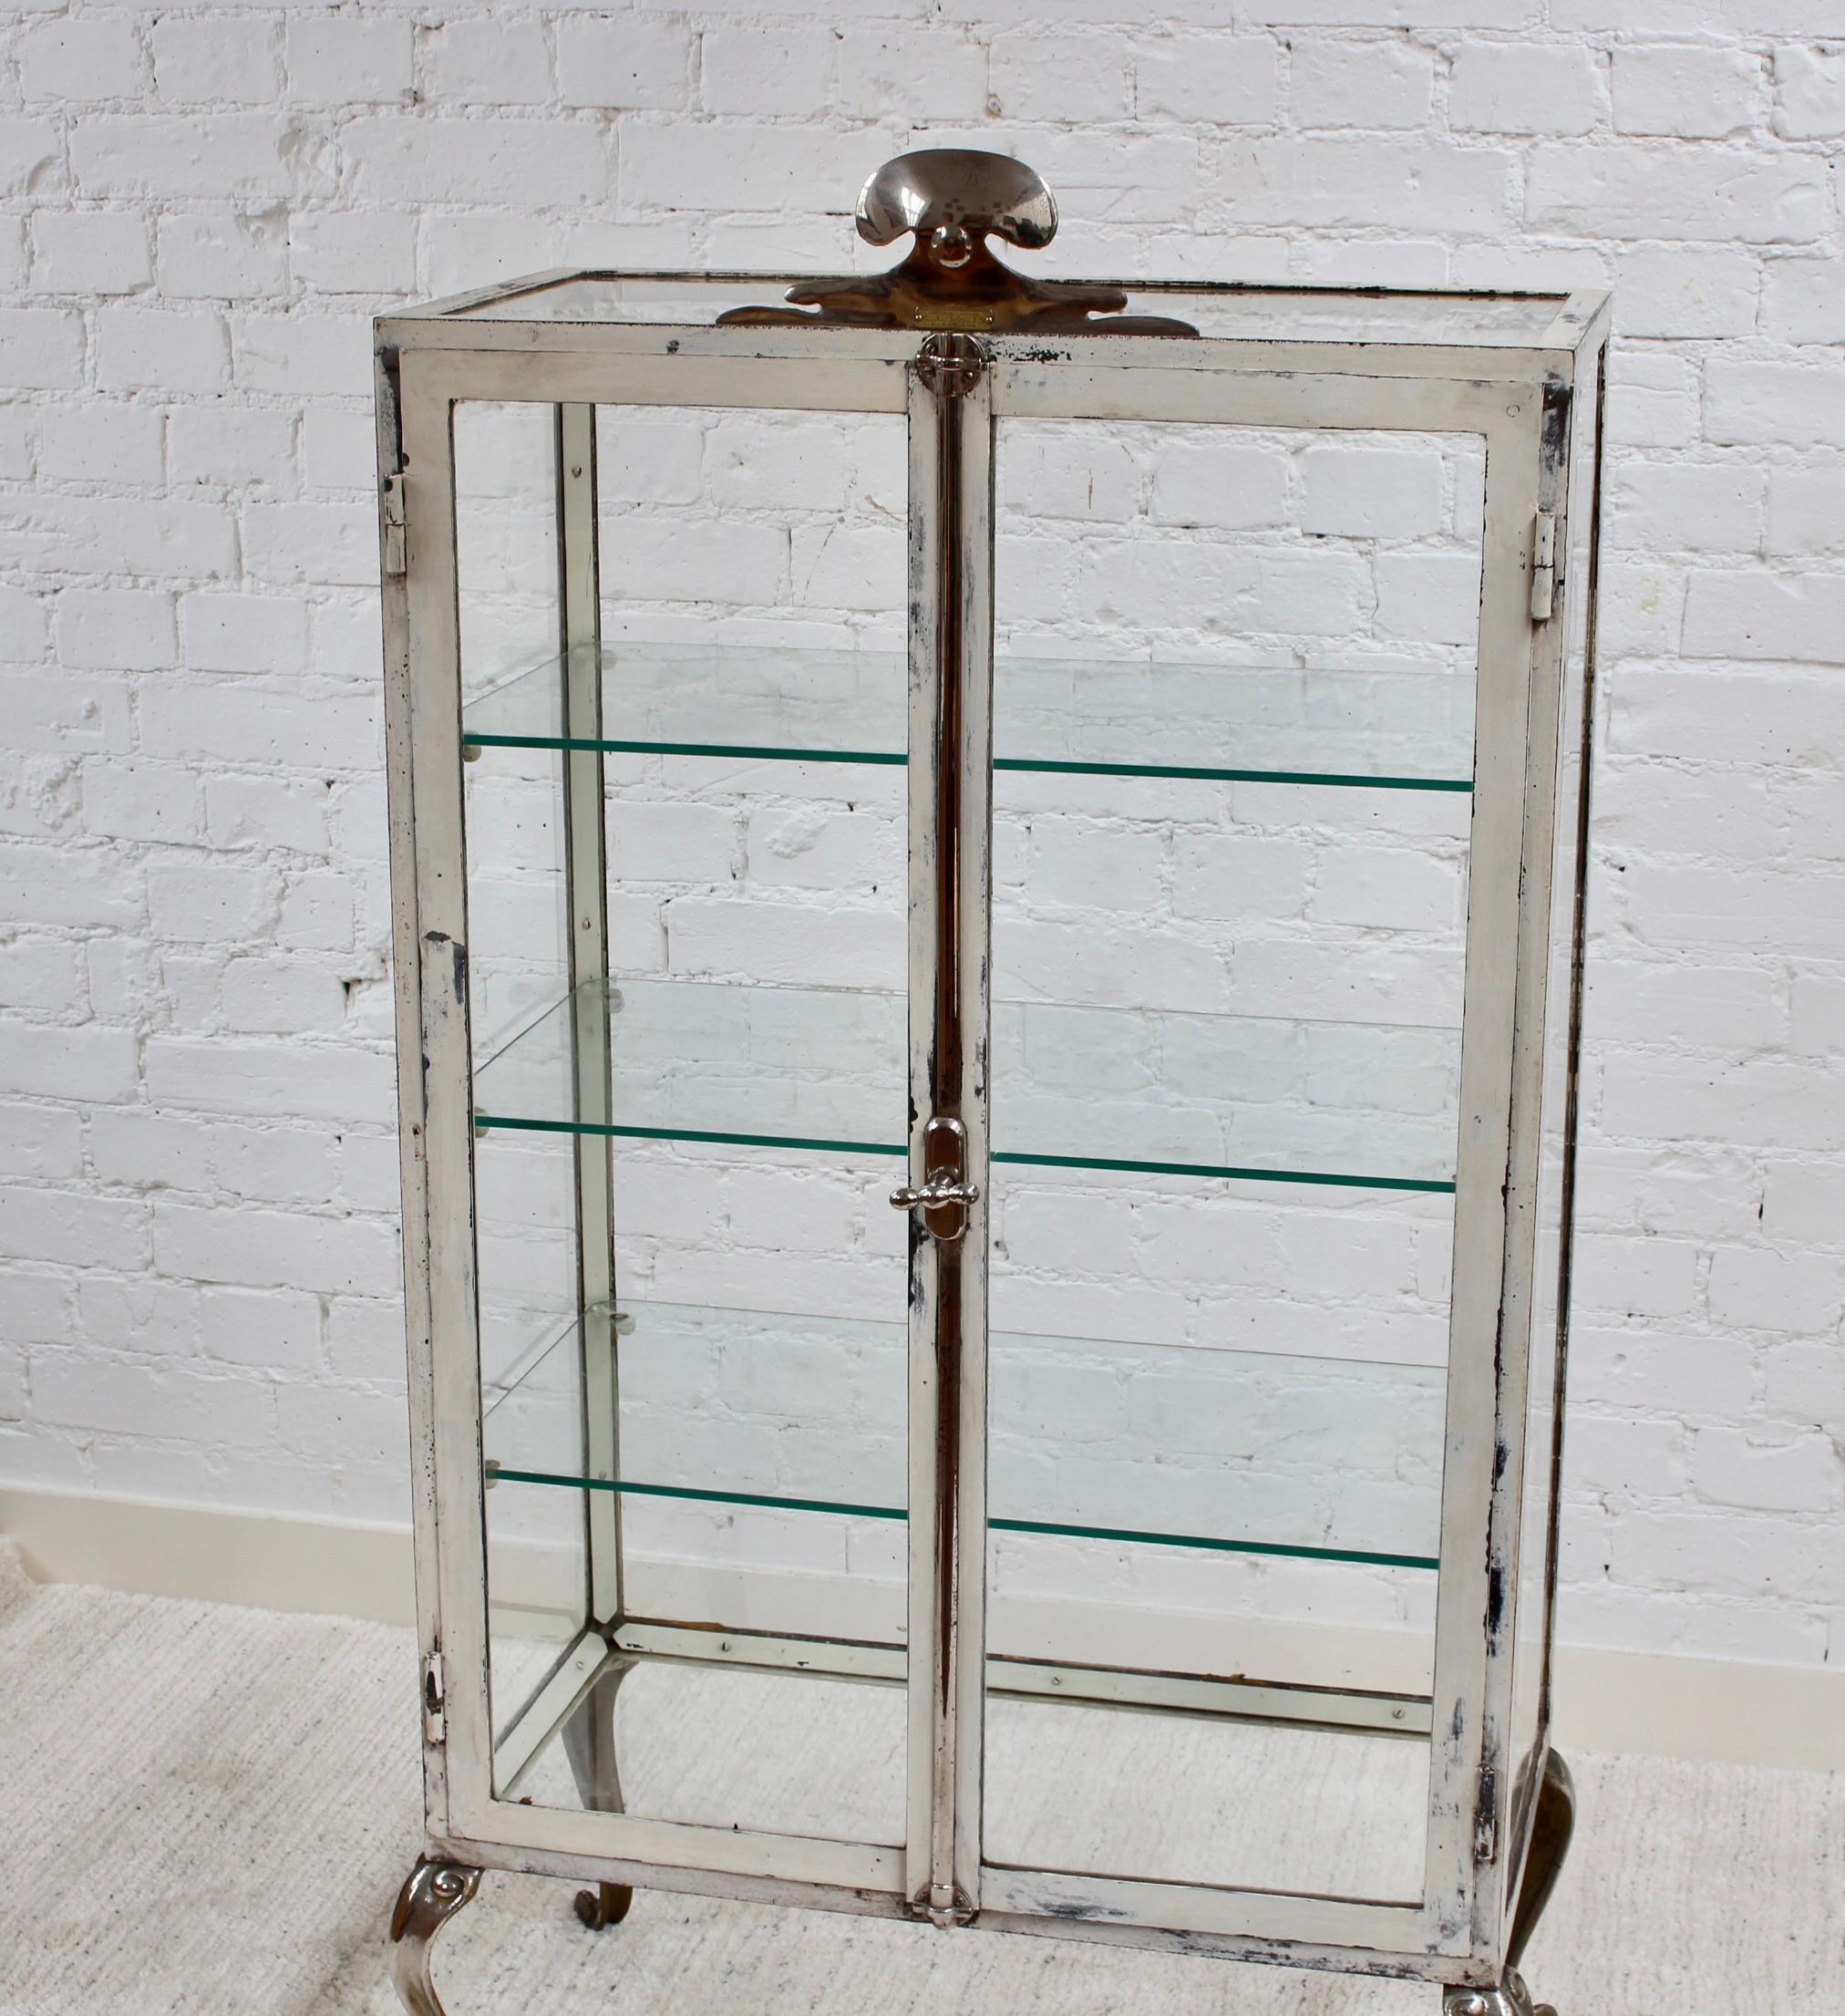 Antique medical cabinet by Clausolles Sociedad Anónima, Barcelona, Spain (circa 1920s). There are many vintage and antique medical cabinets on the market but none as stunningly beautiful, stylish and original as this one. Discovered in the South of